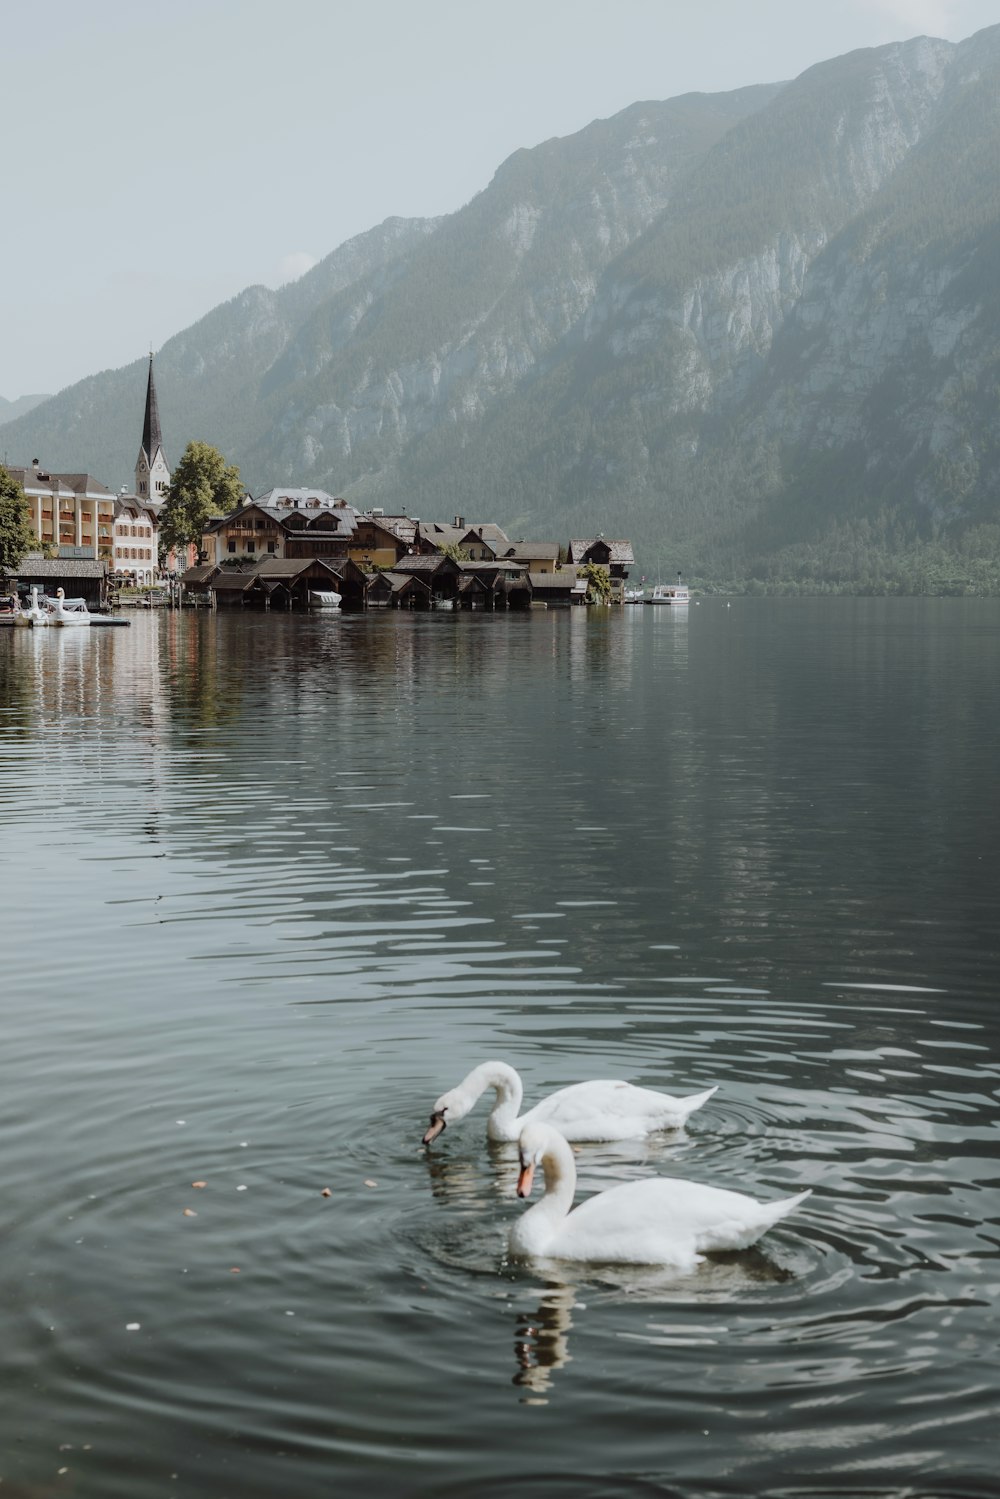 two white swans swimming in a lake near a town